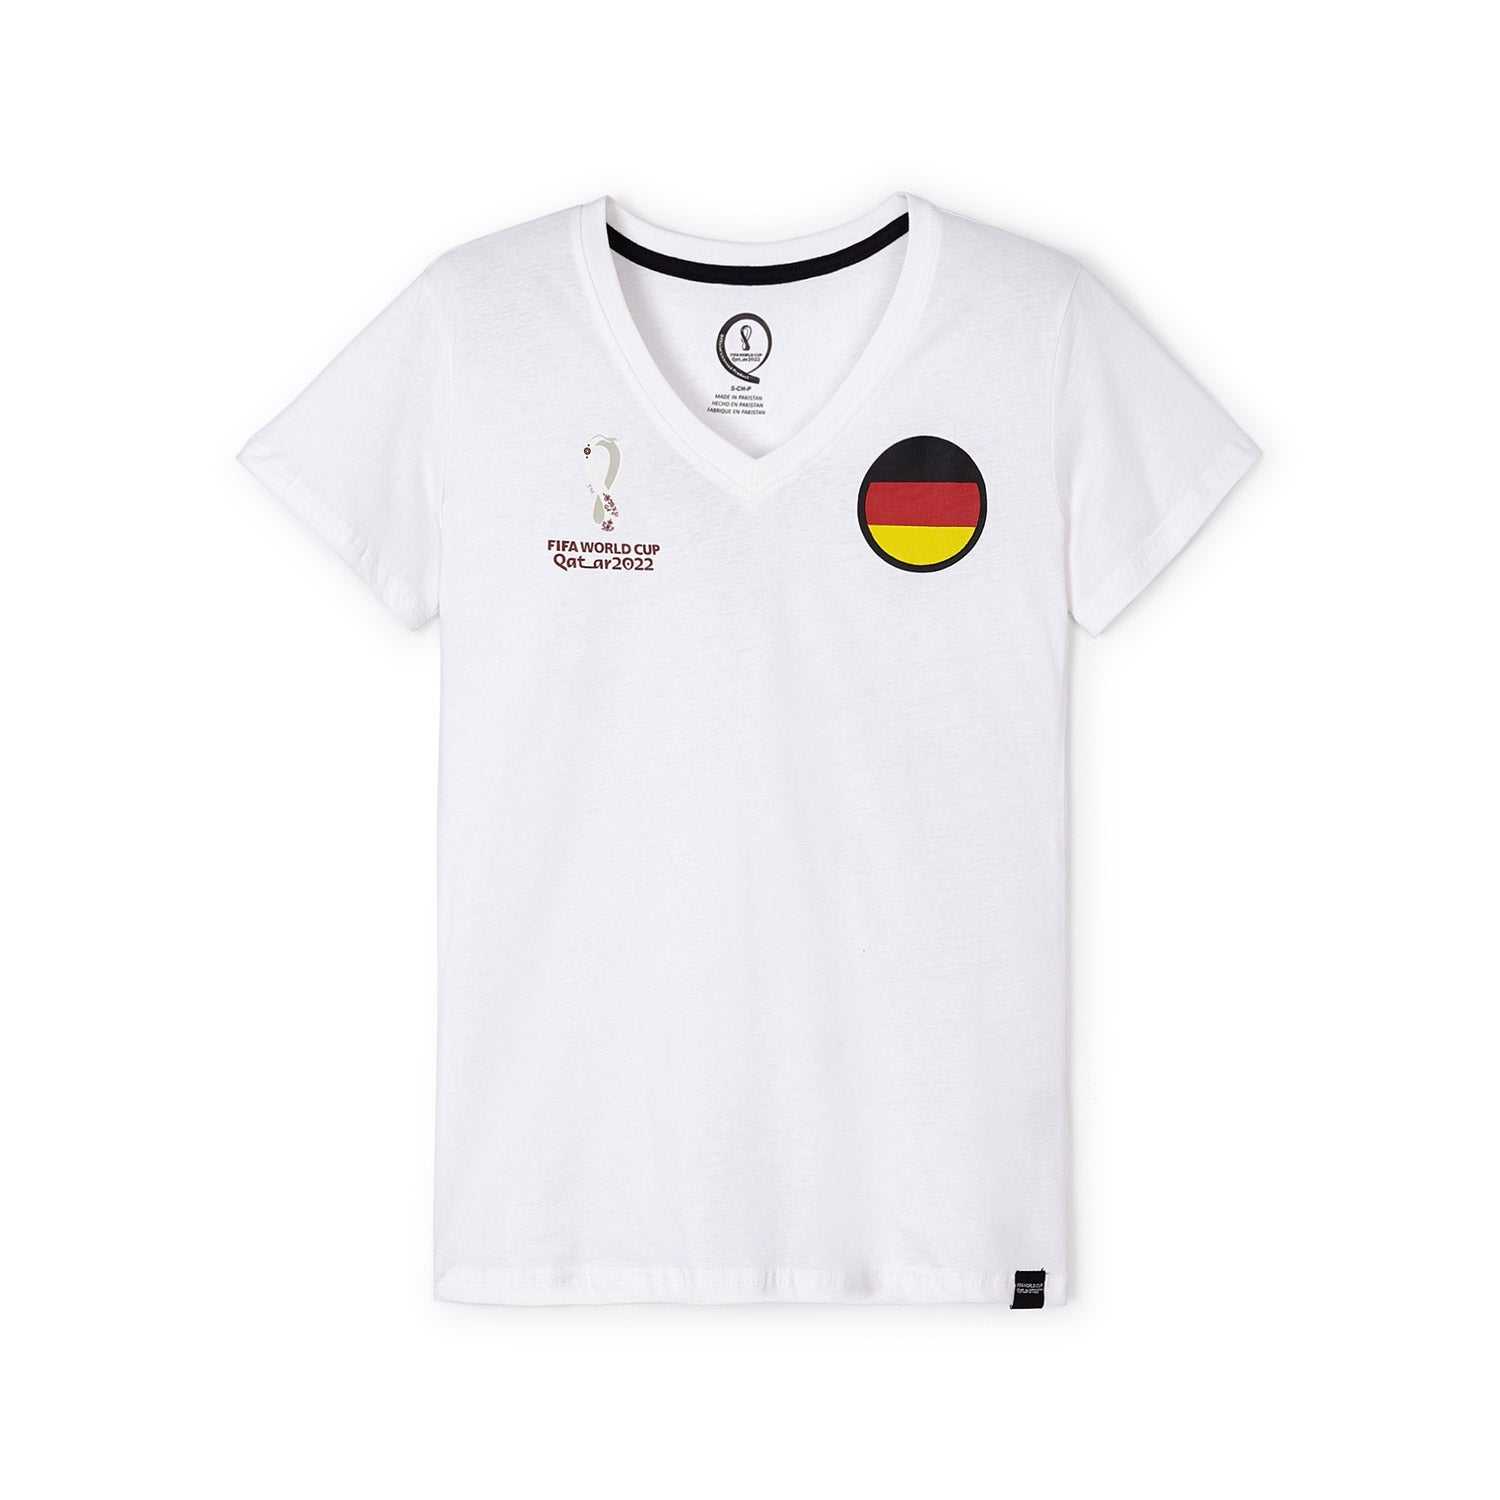 2022 World Cup Germany White T-Shirt - Women's